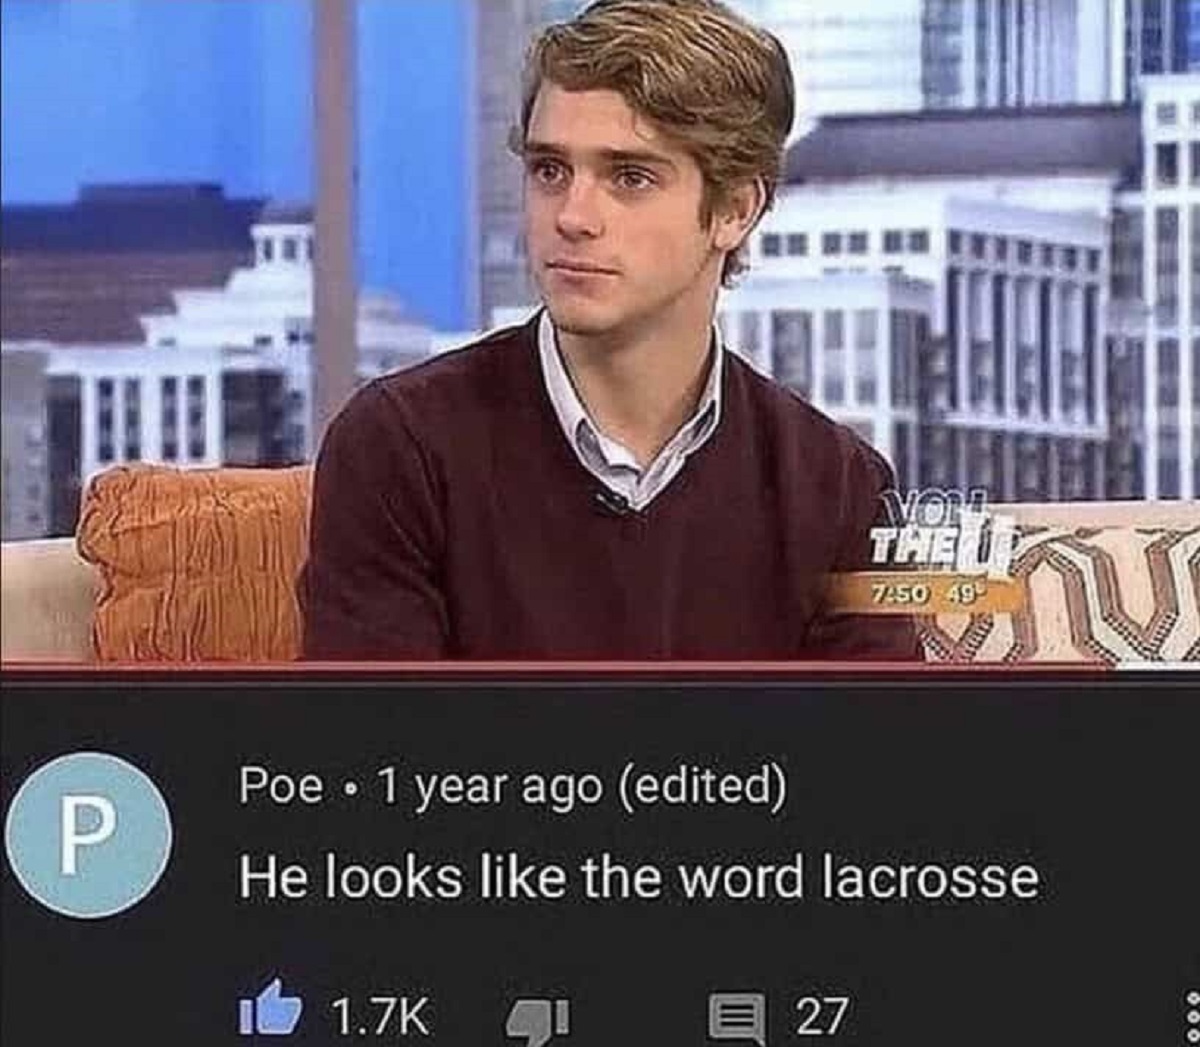 guy that looks like the word lacrosse - P Mon The I 49 Poe 1 year ago edited He looks the word lacrosse 27